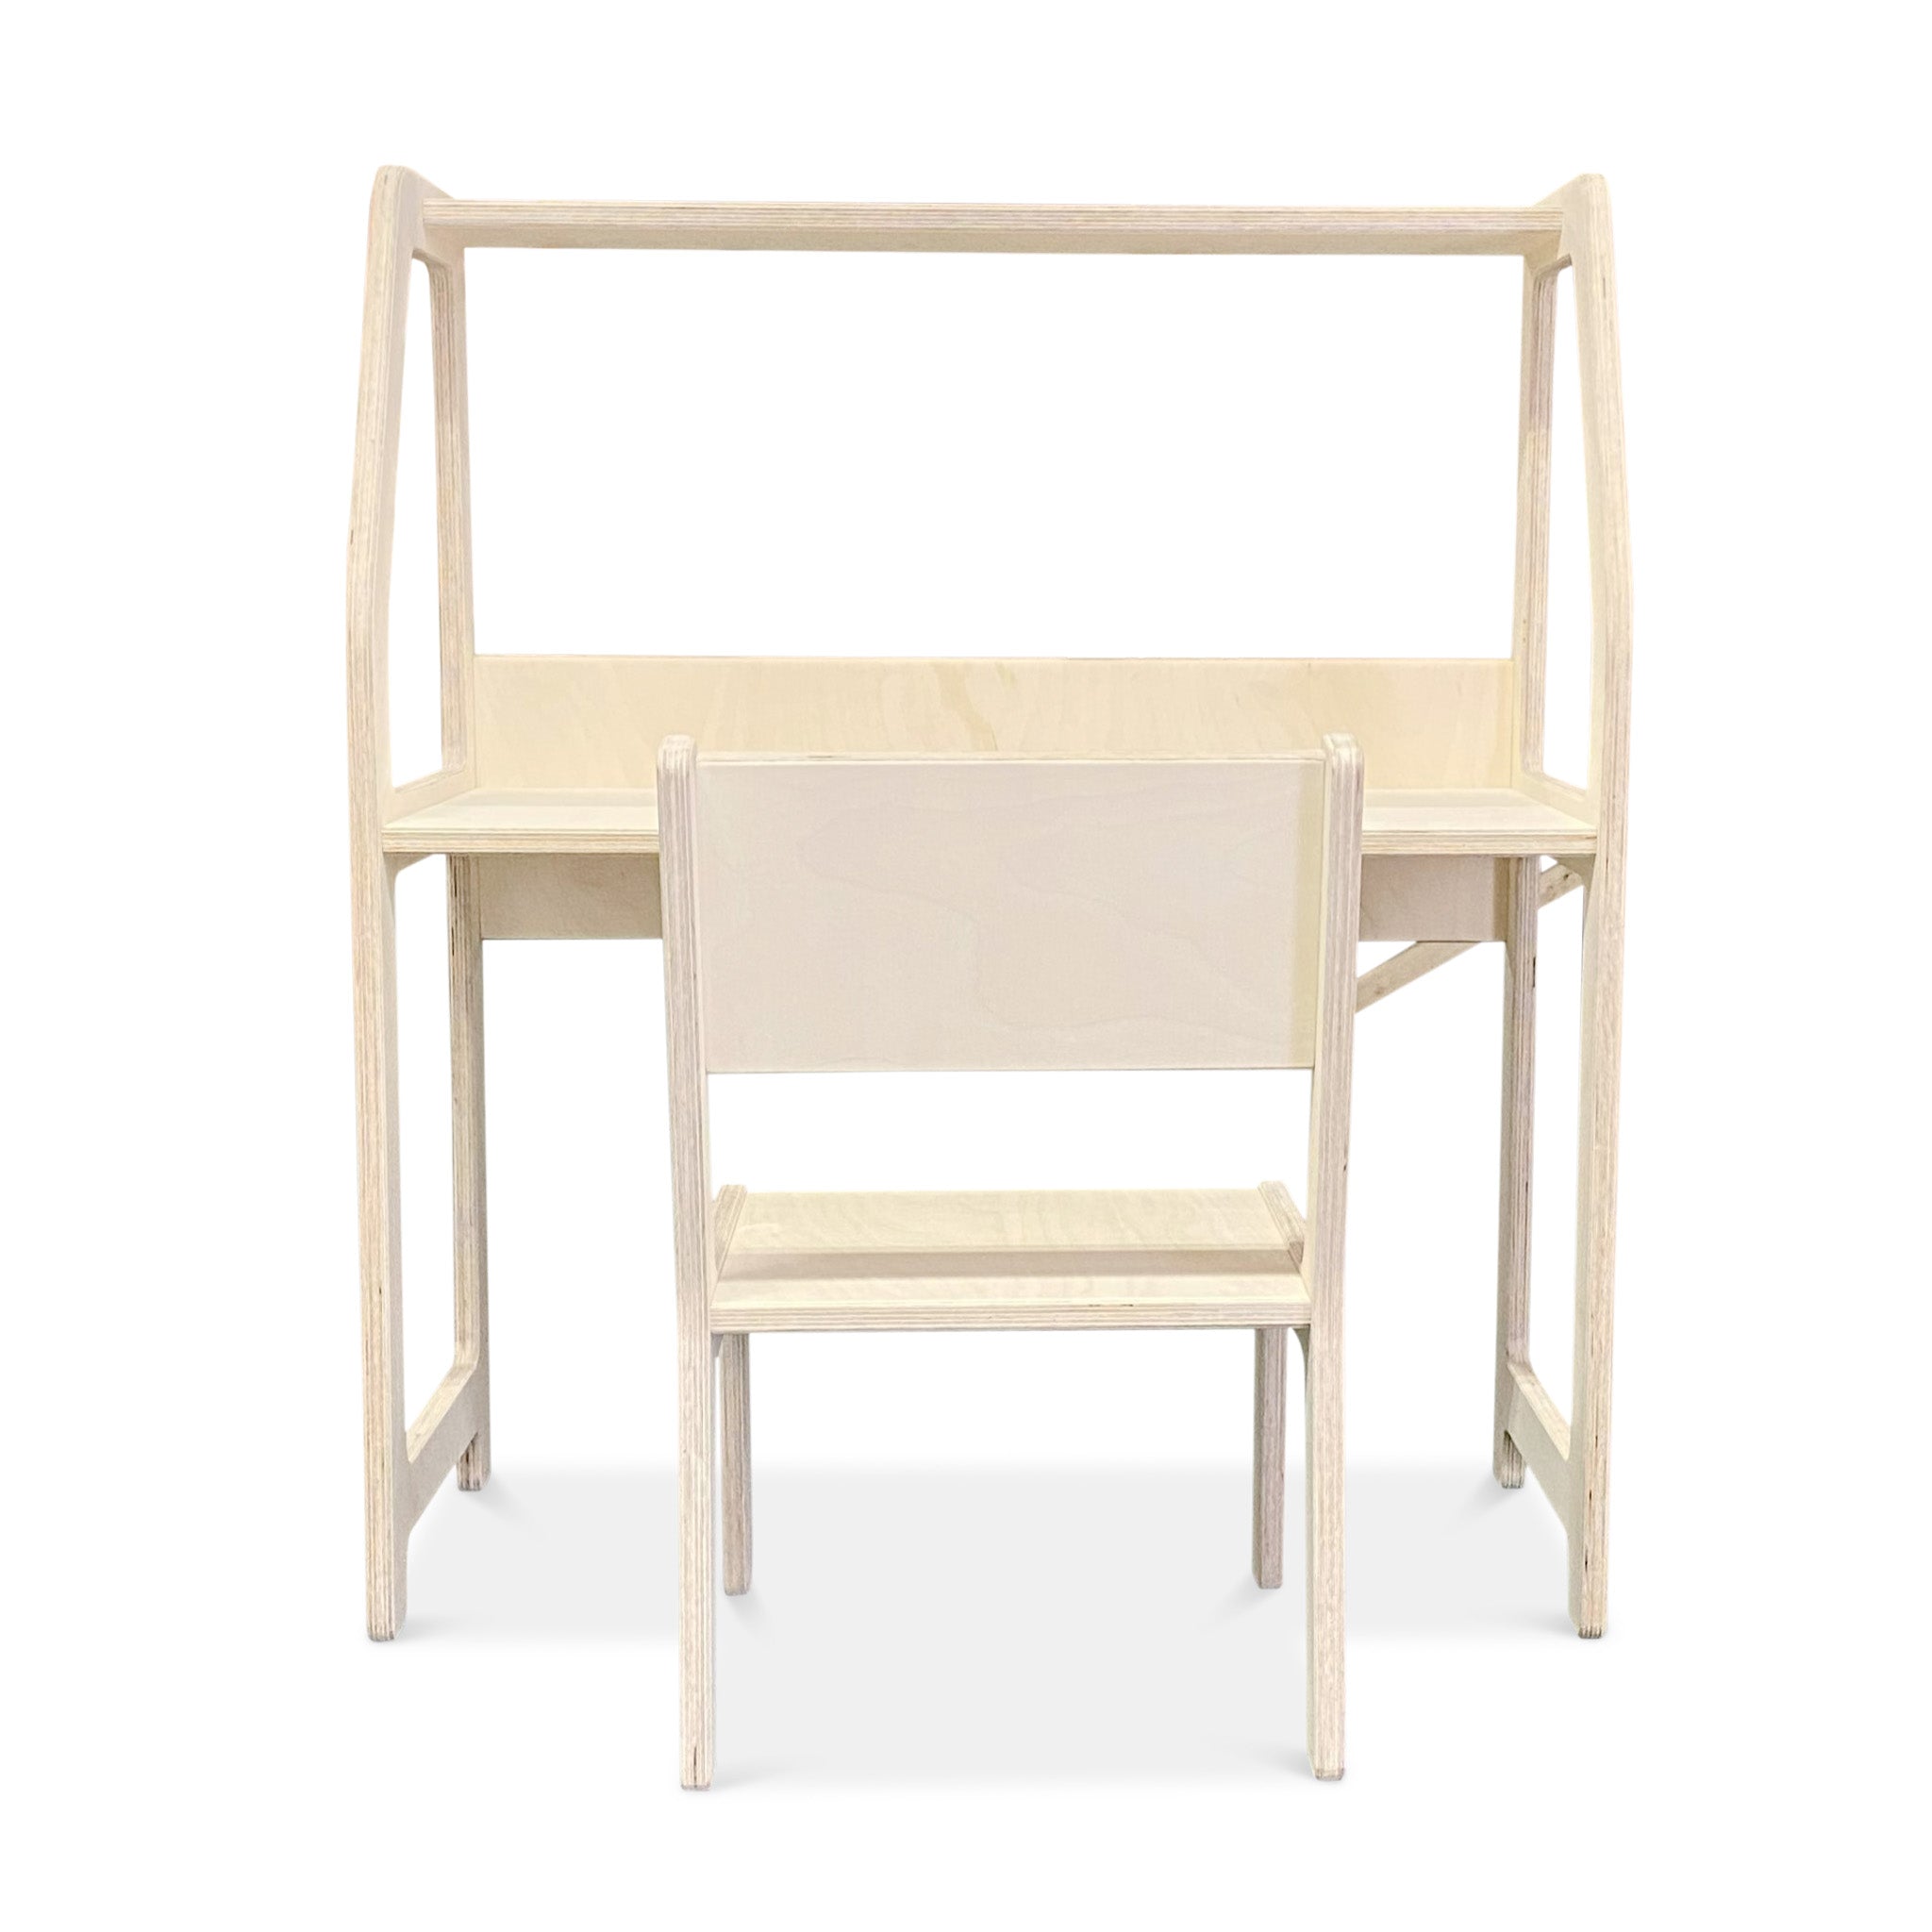 Montessori wooden desk children's room 2-7 years | With chair - natural